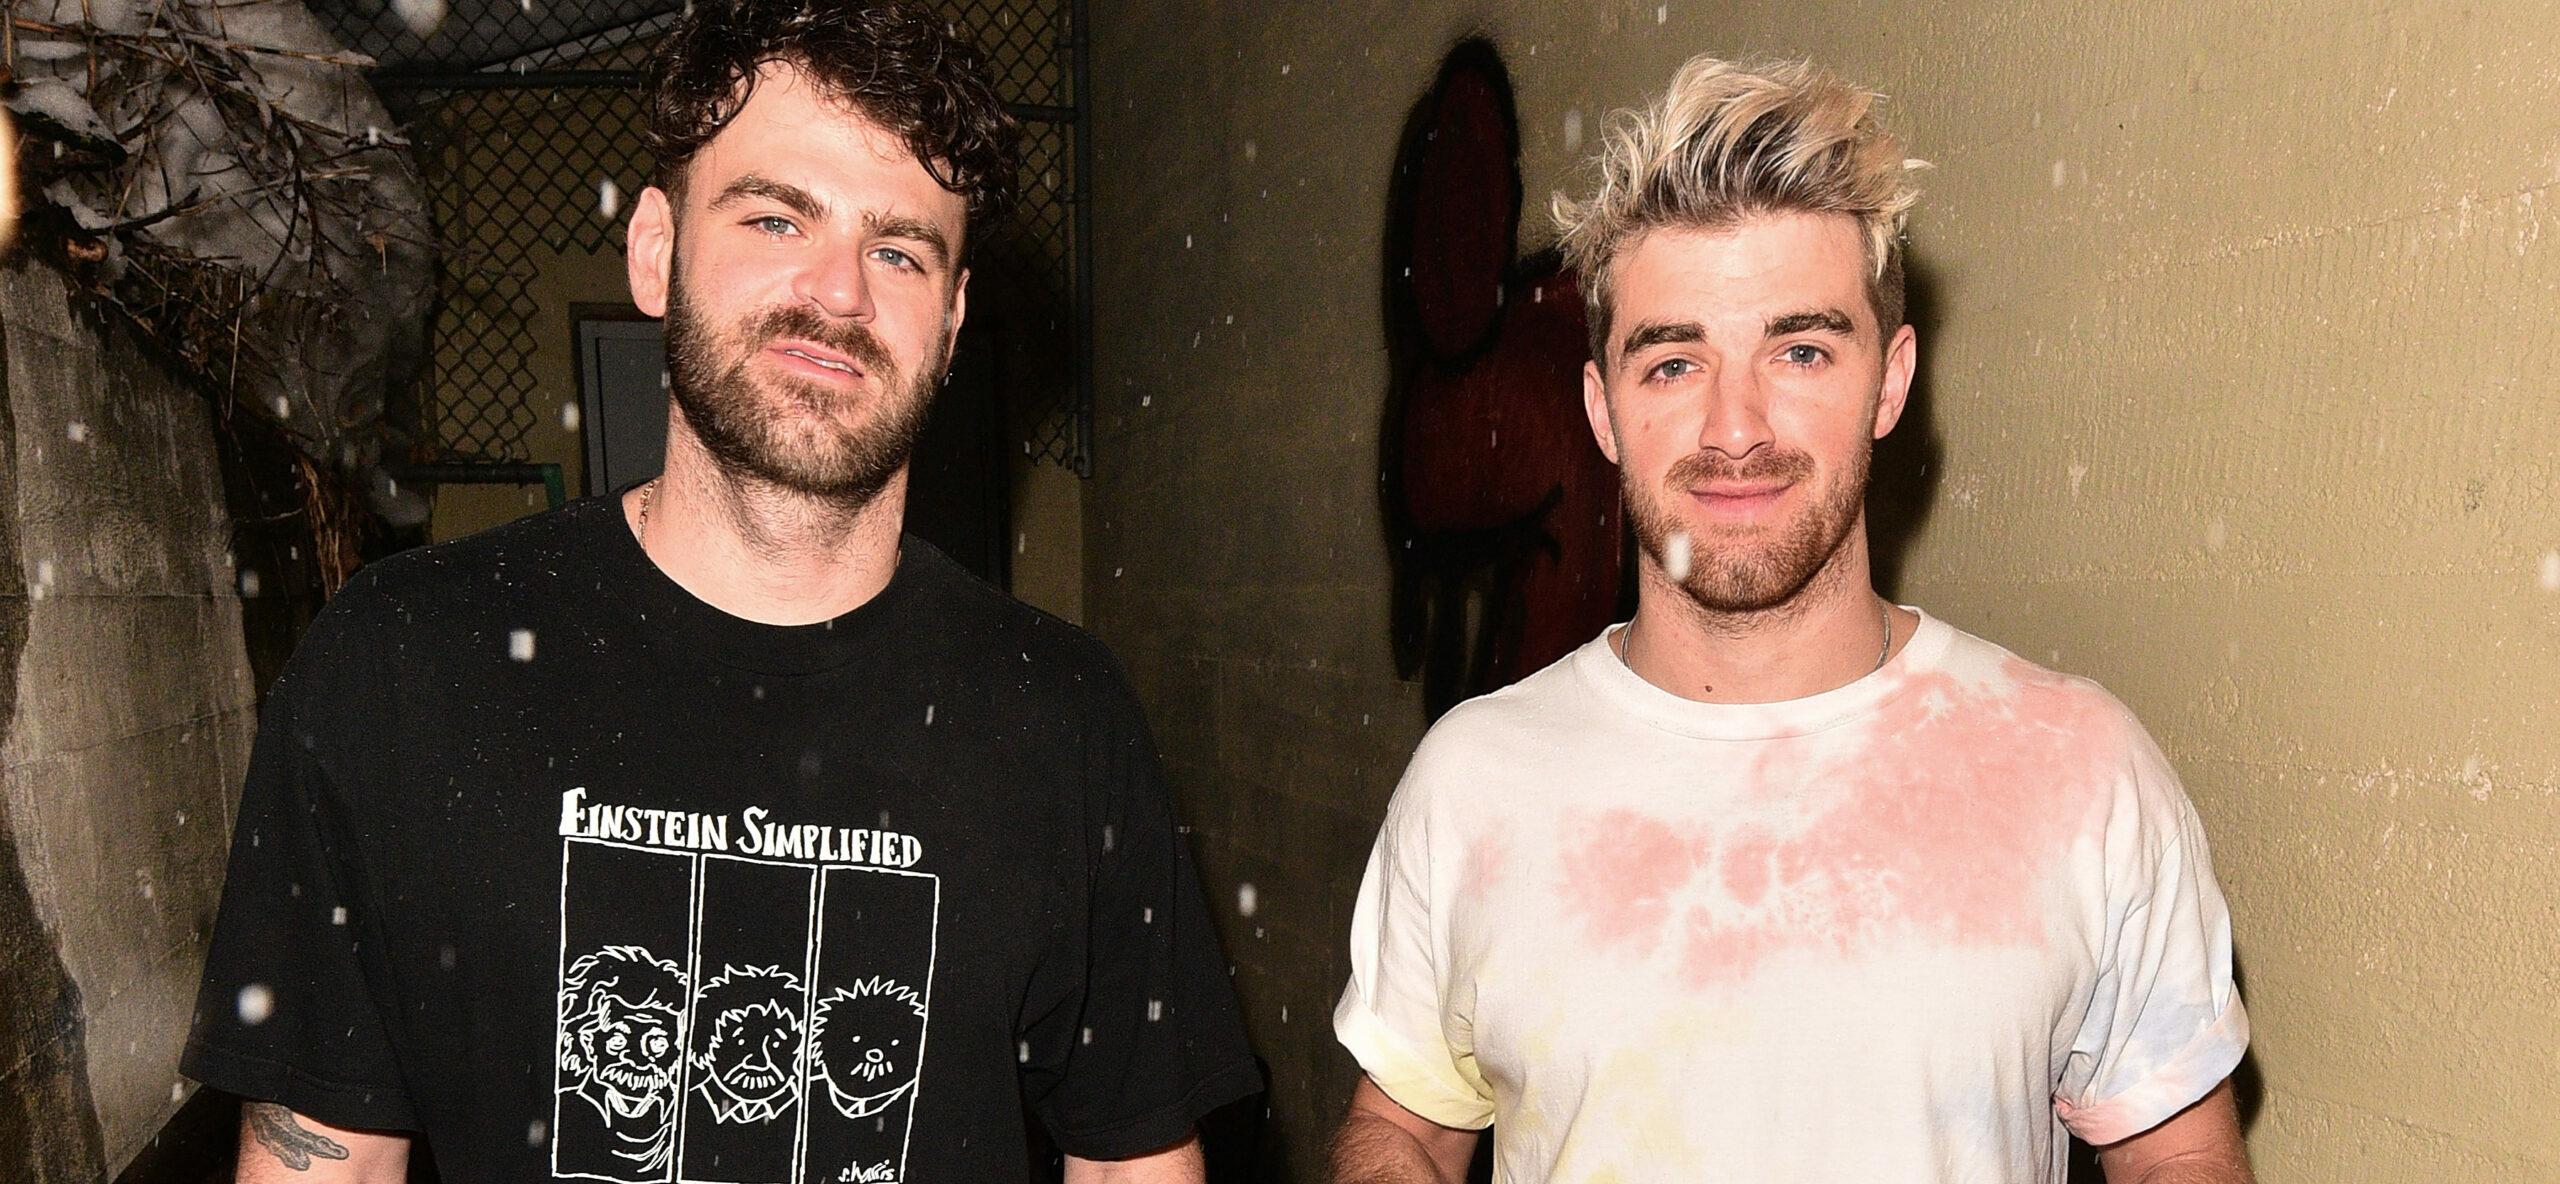 The Chainsmokers Reveal FAKE Fan Story They Told For Clout!